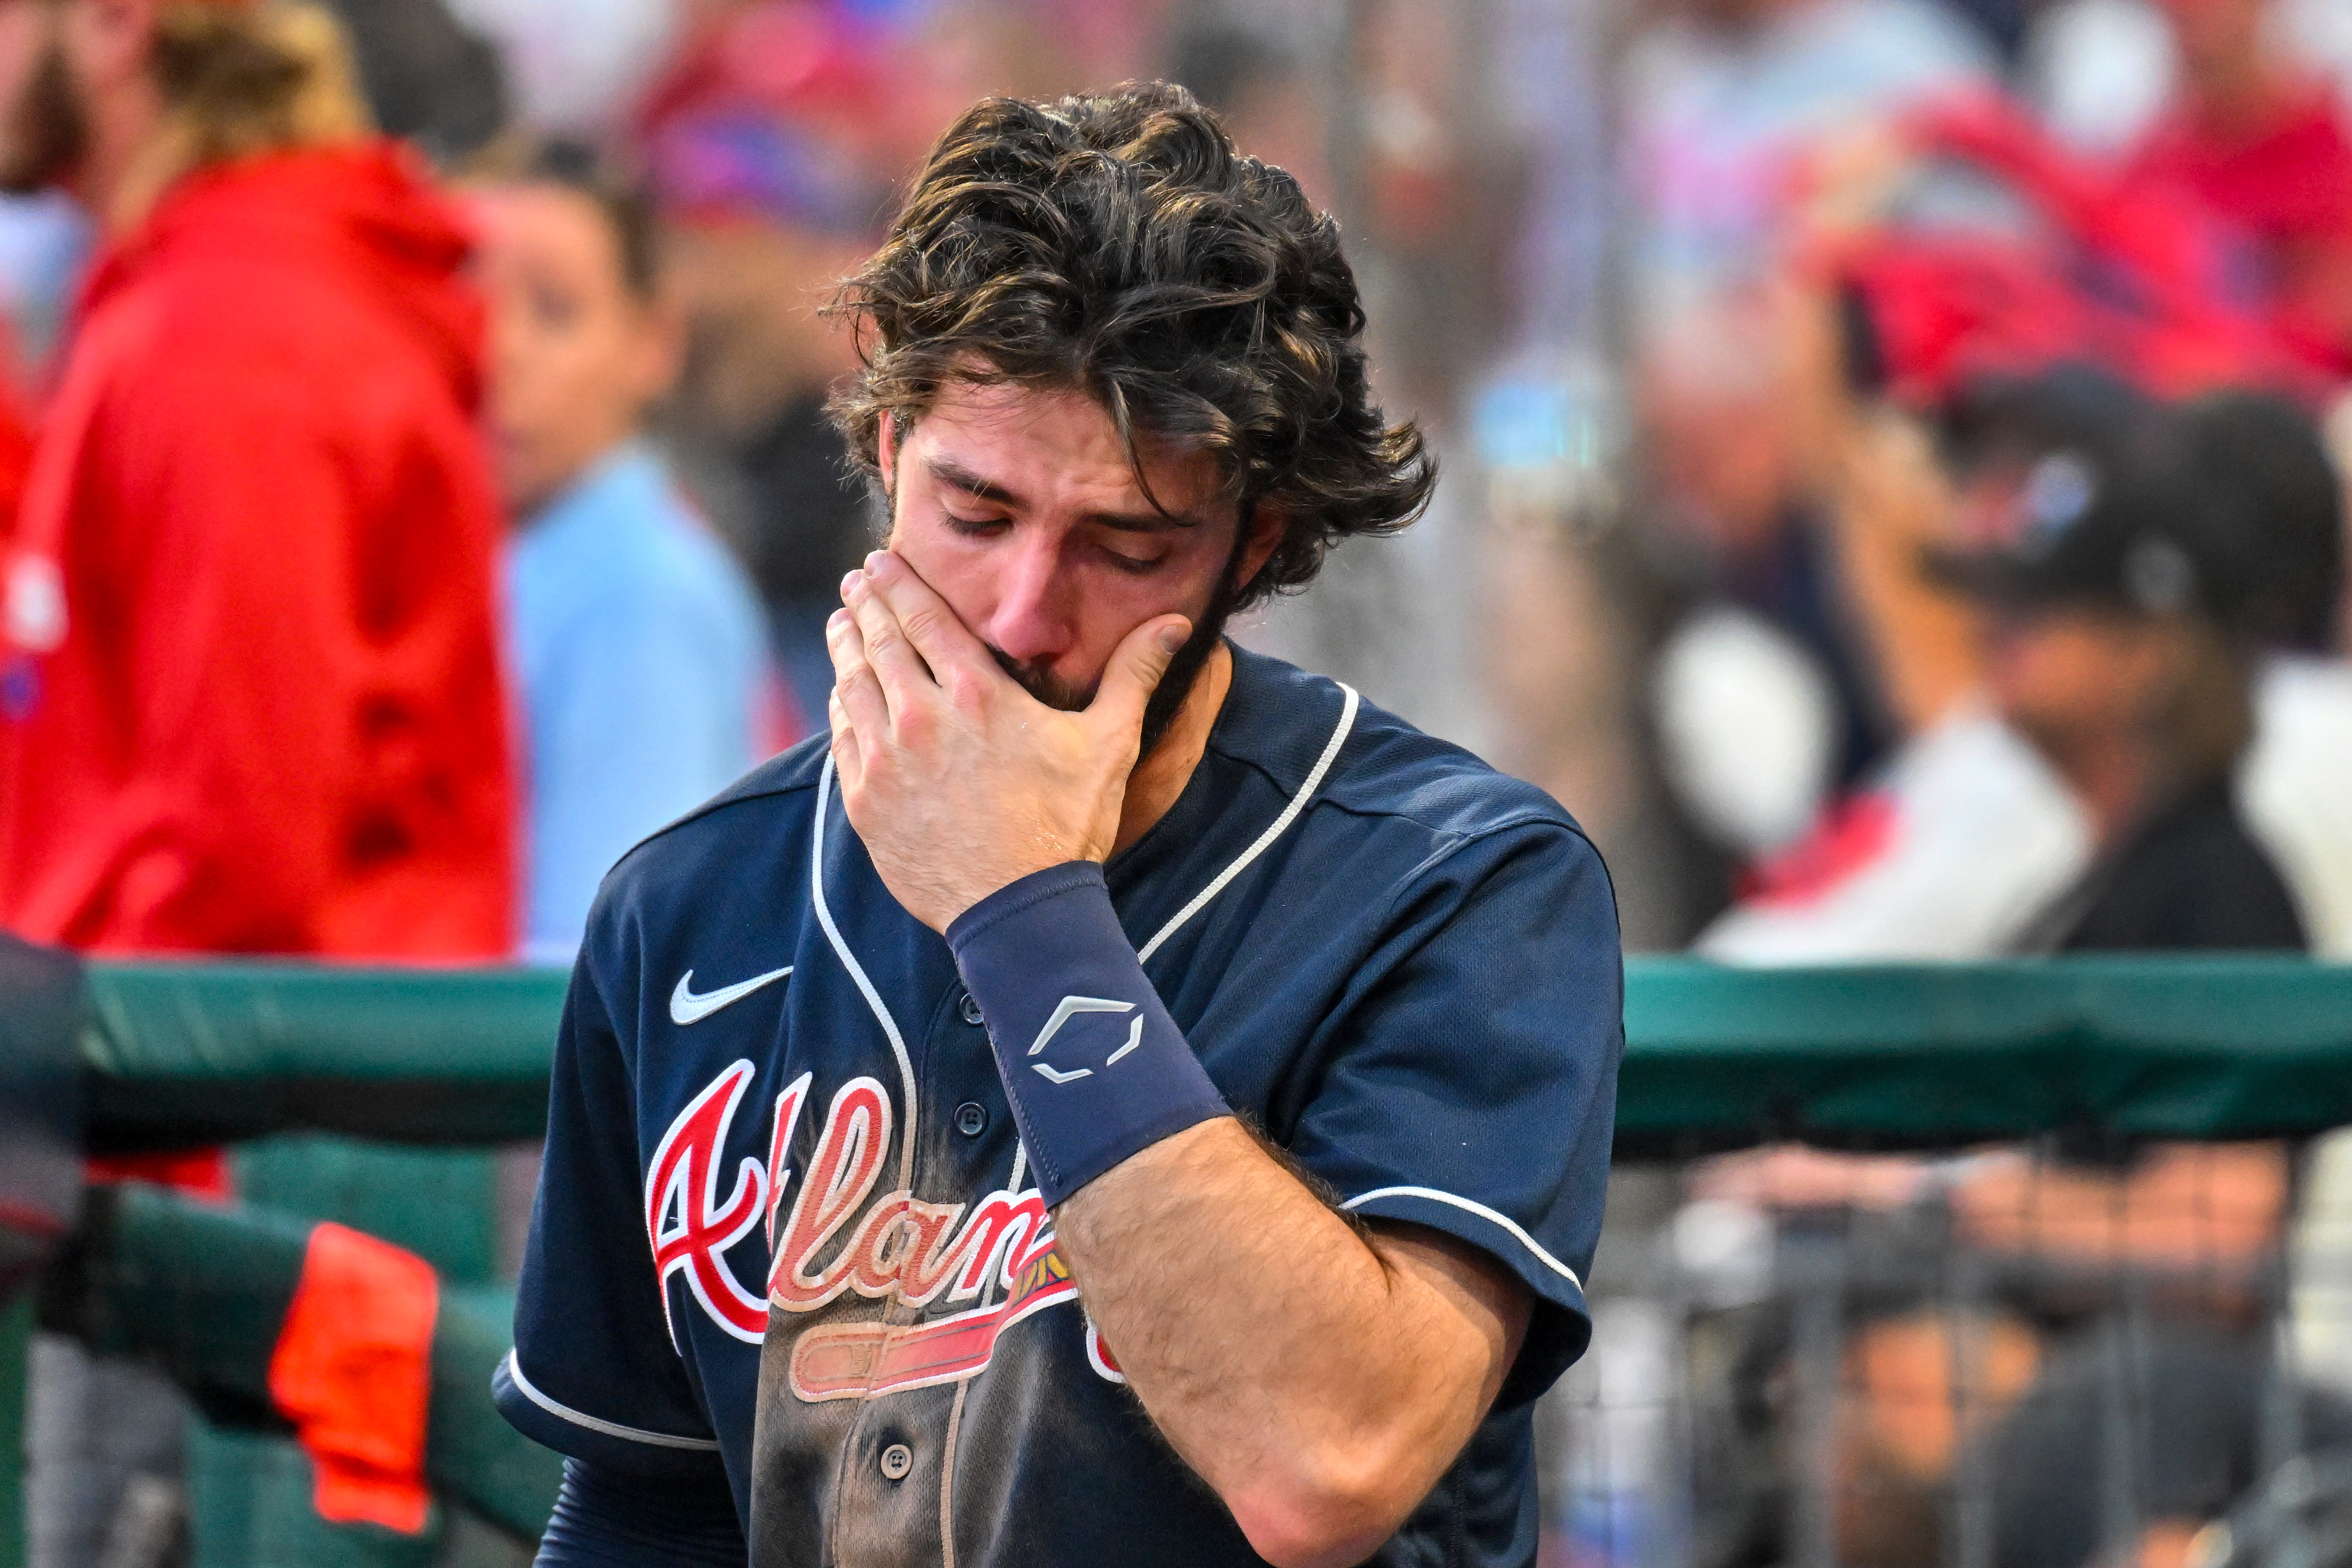 Despite slow start, Dansby Swanson excited about future with Braves